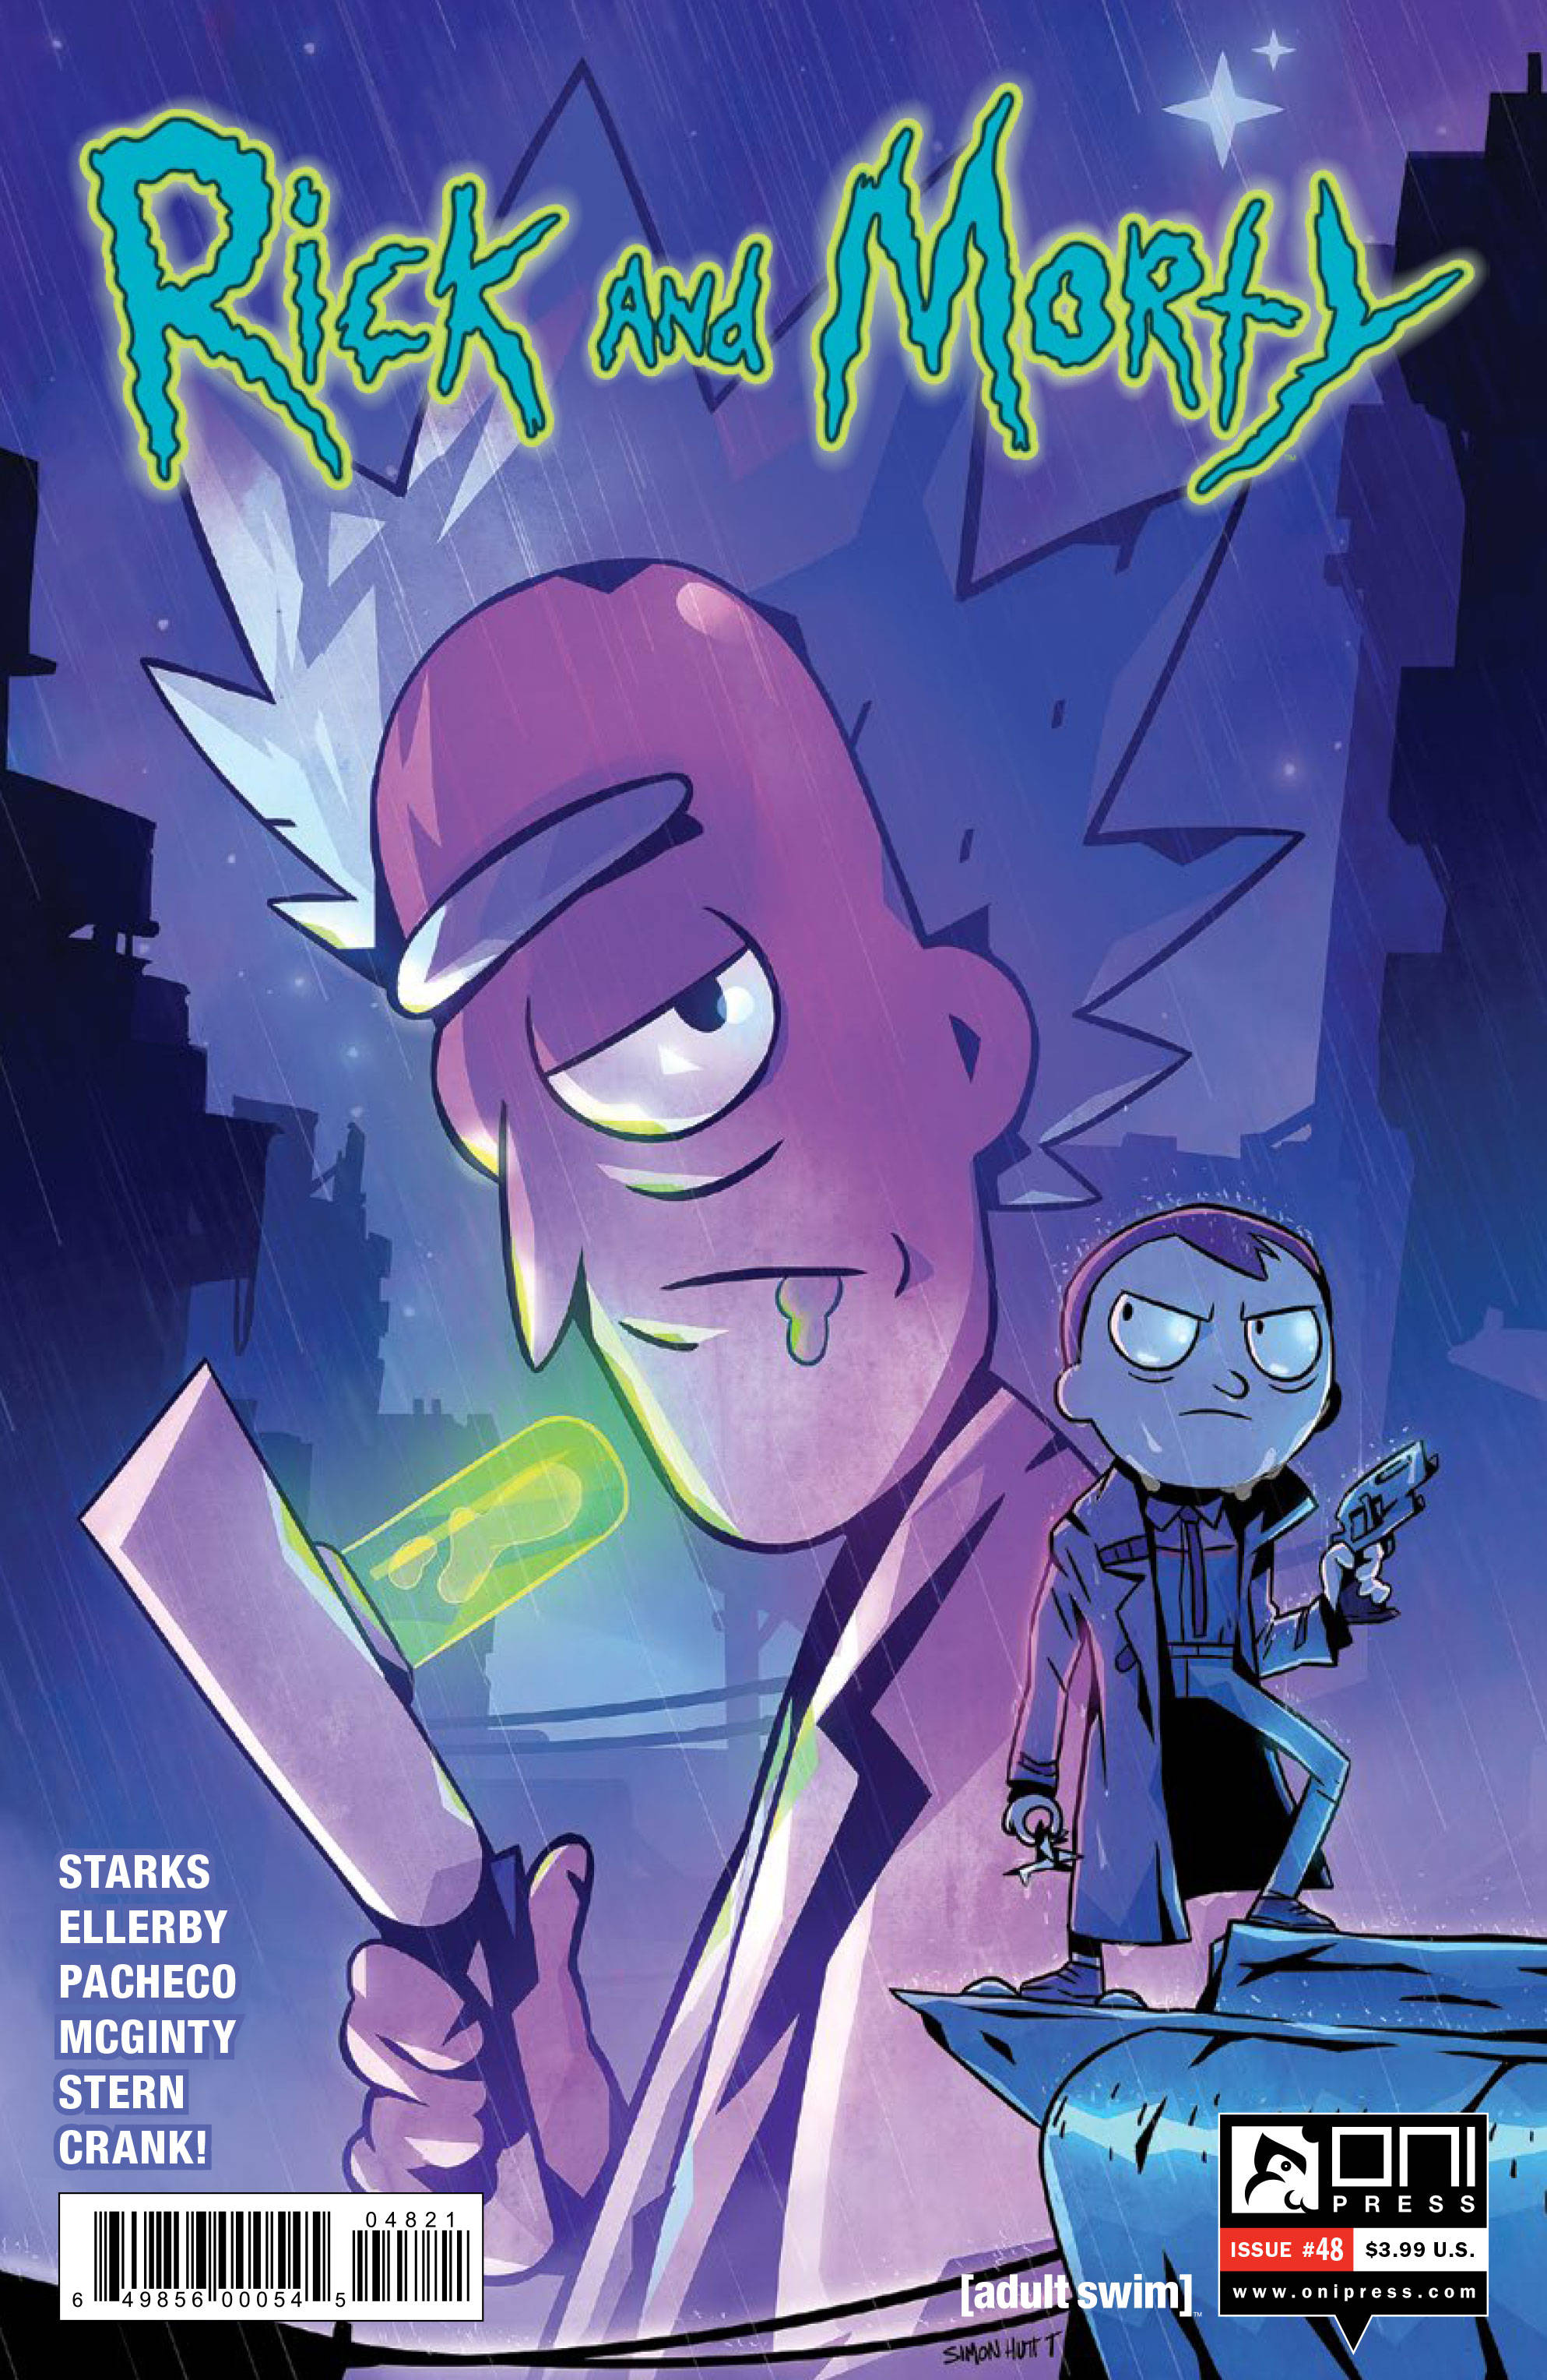 Rick and Morty #48 Cover B Troussellier (2015)